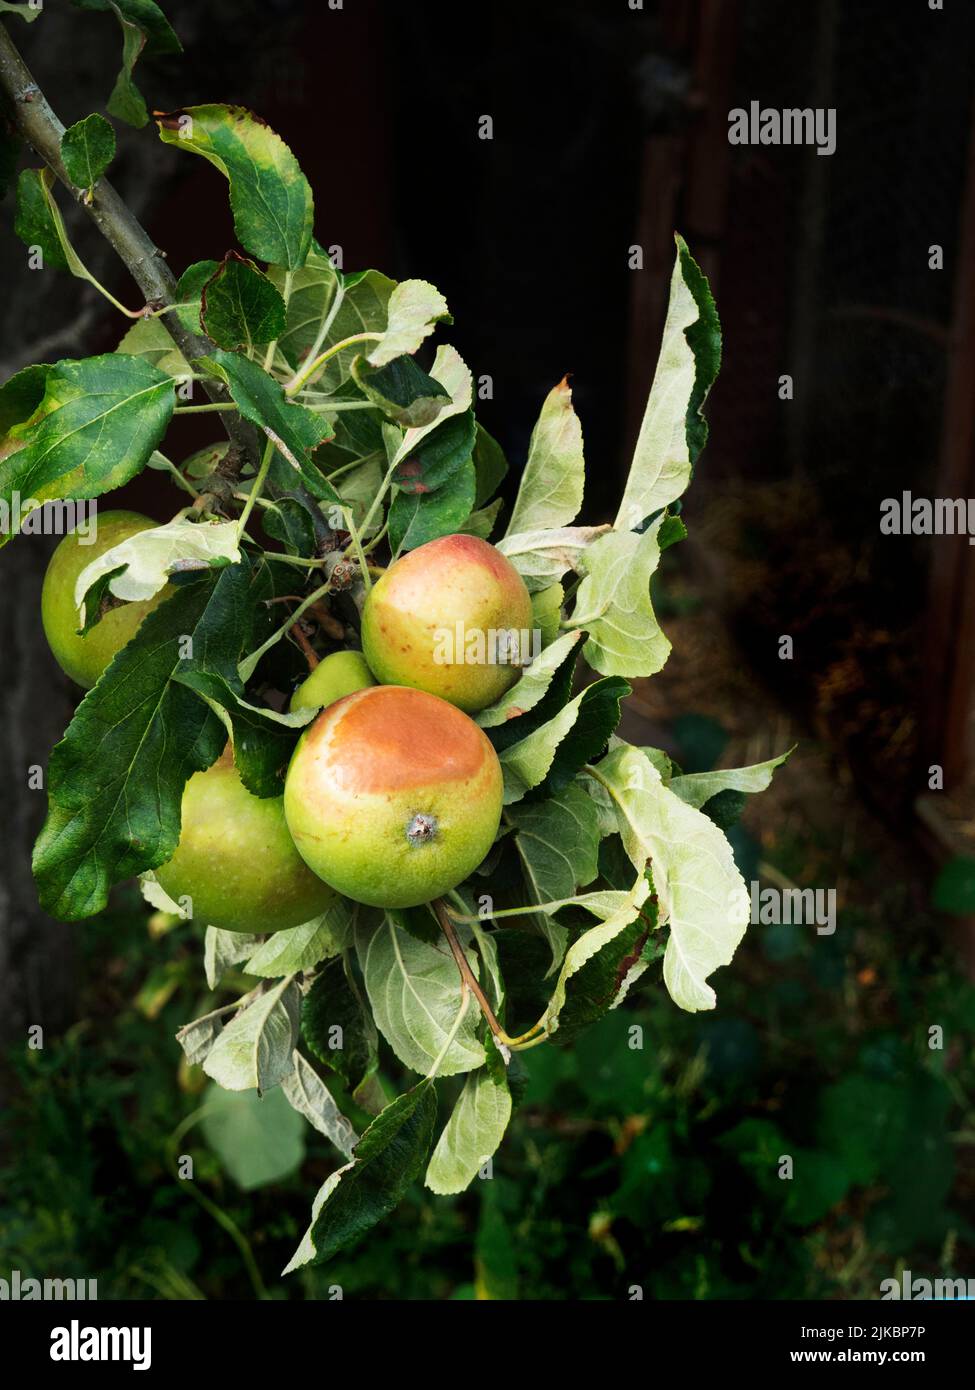 Apples scorched on the tree. 40c Stock Photo